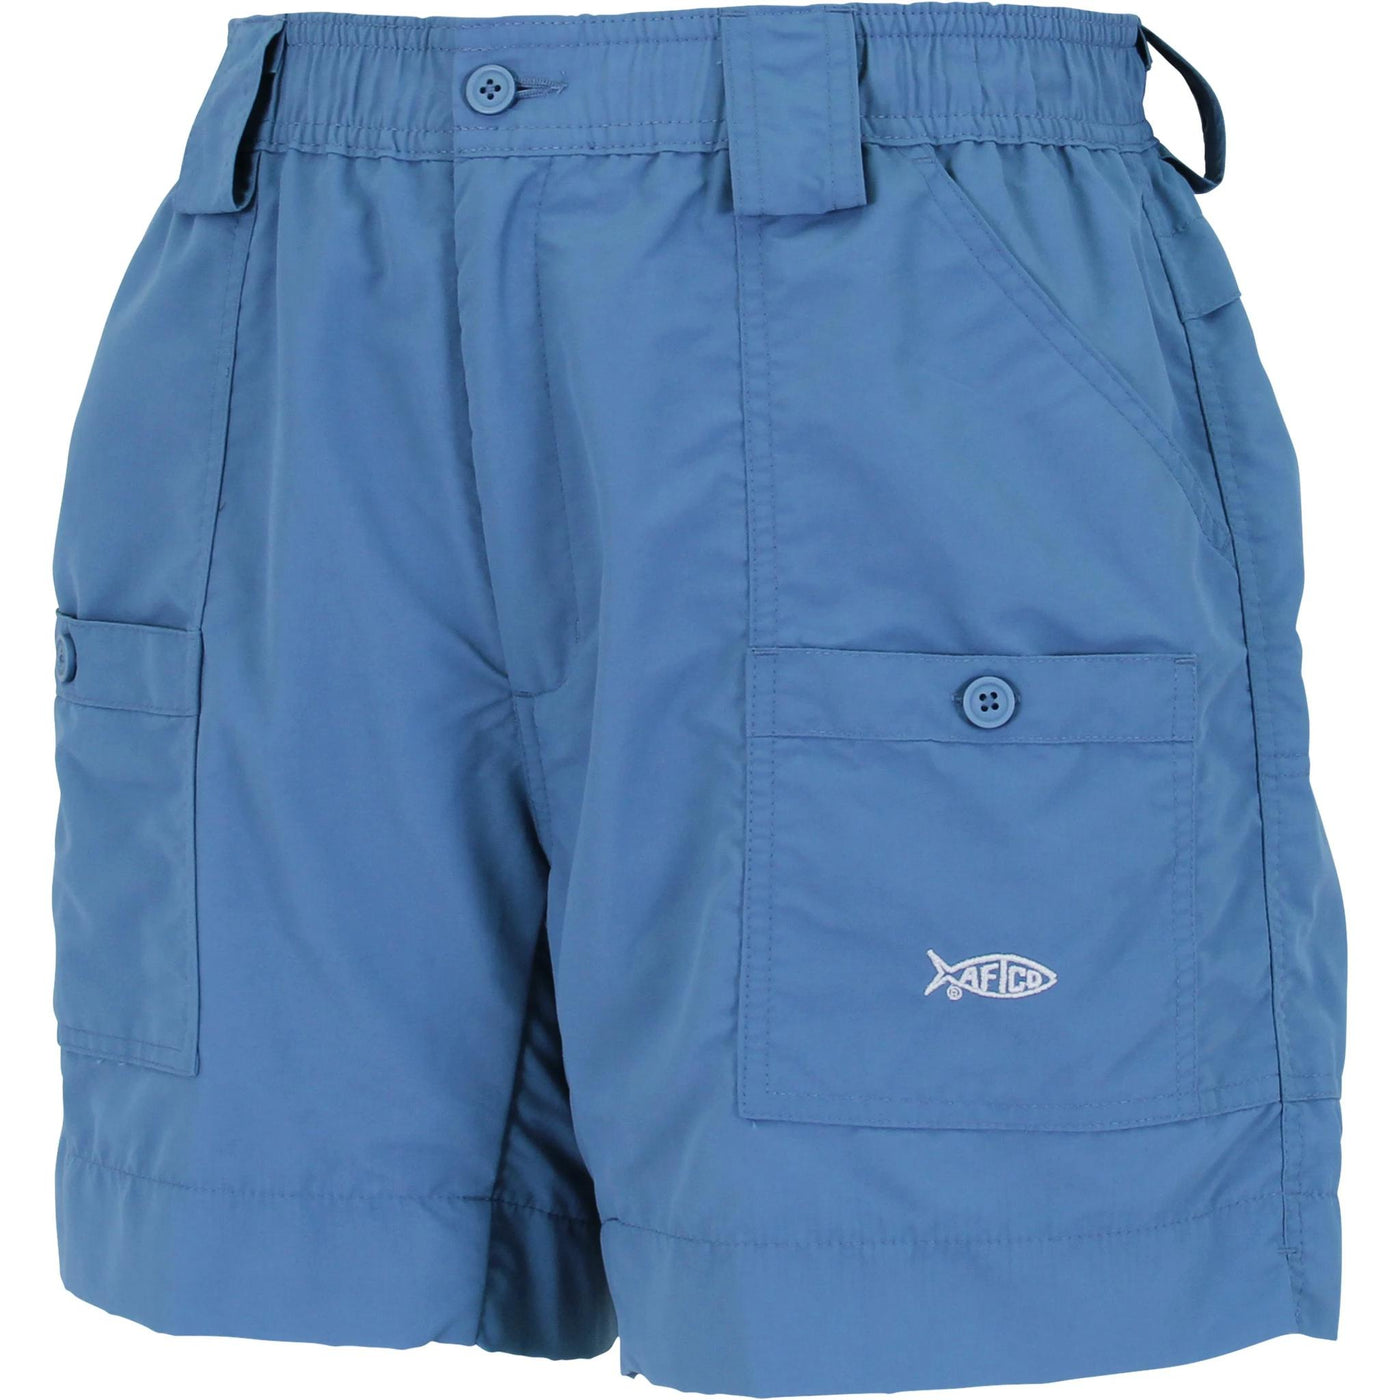 Aftco Original Fishing Shorts - Long-MENS CLOTHING-Air Force Blue-28-Kevin's Fine Outdoor Gear & Apparel